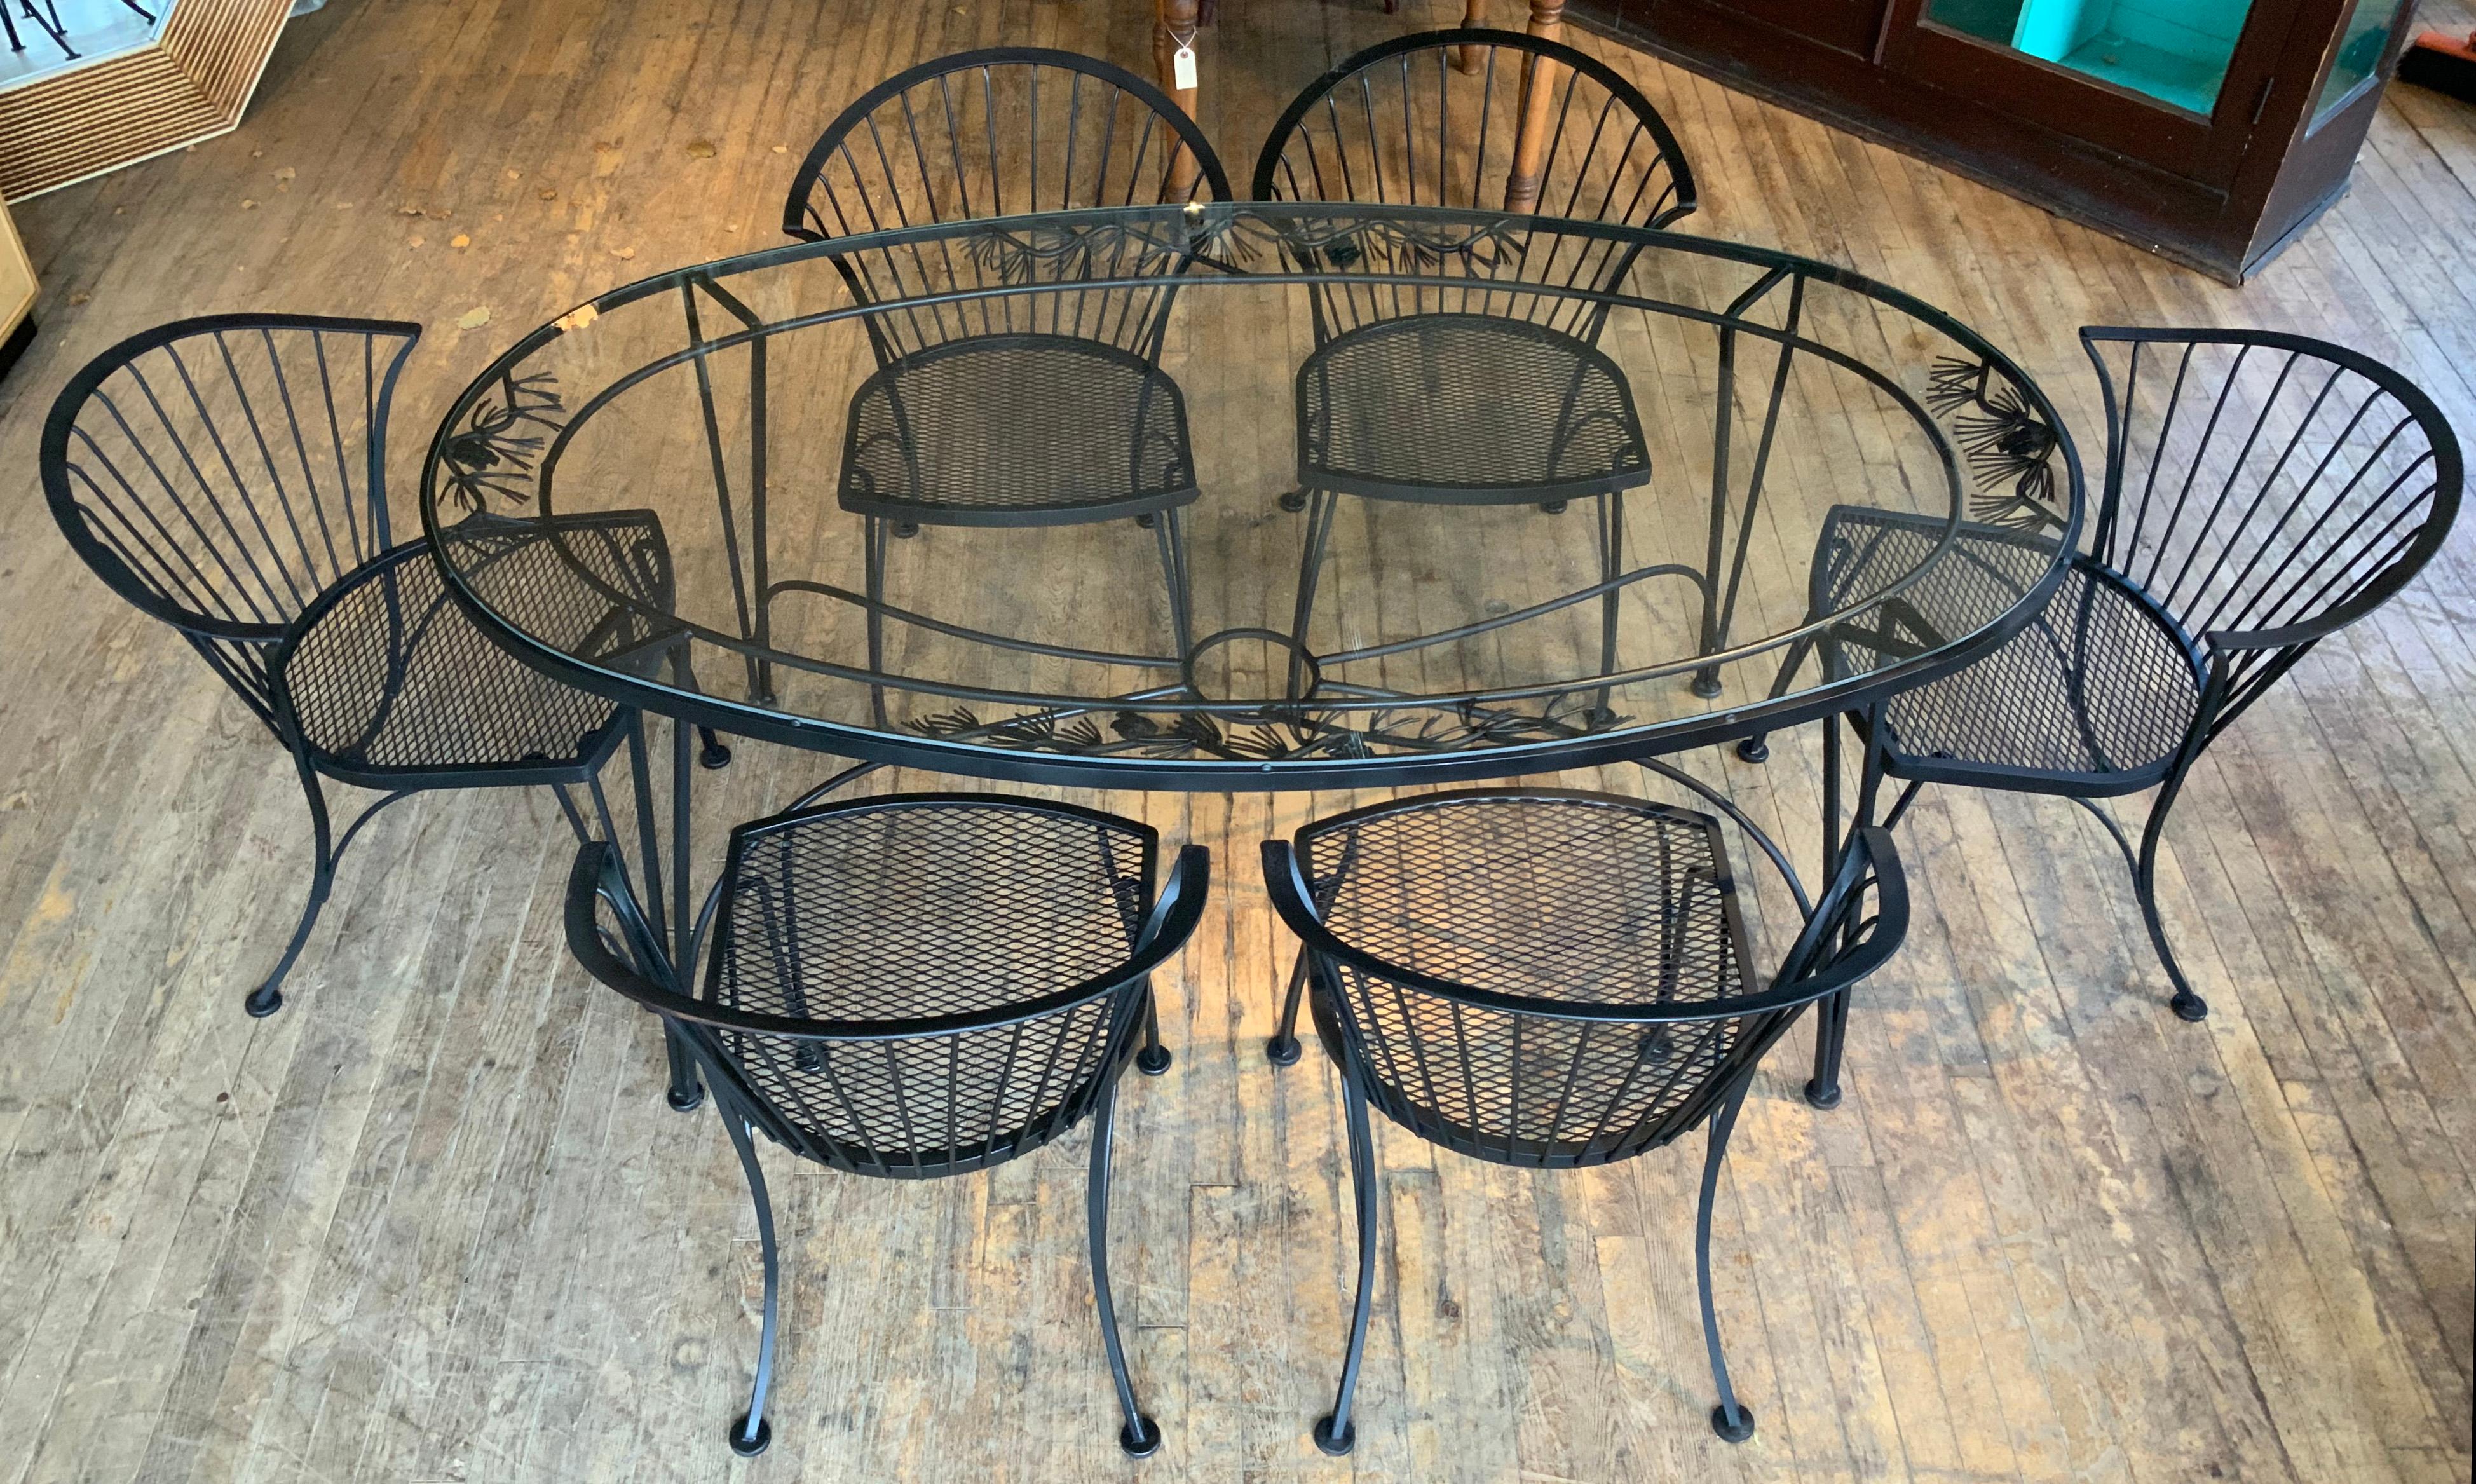 A vintage 1950s wrought iron garden dining set by Woodard. 'Pinecrest' was one of their most charming designs in the 1950s, named for the pine needle & pinecone motif in the skirt of the dining table. this set consists of the large oval dining